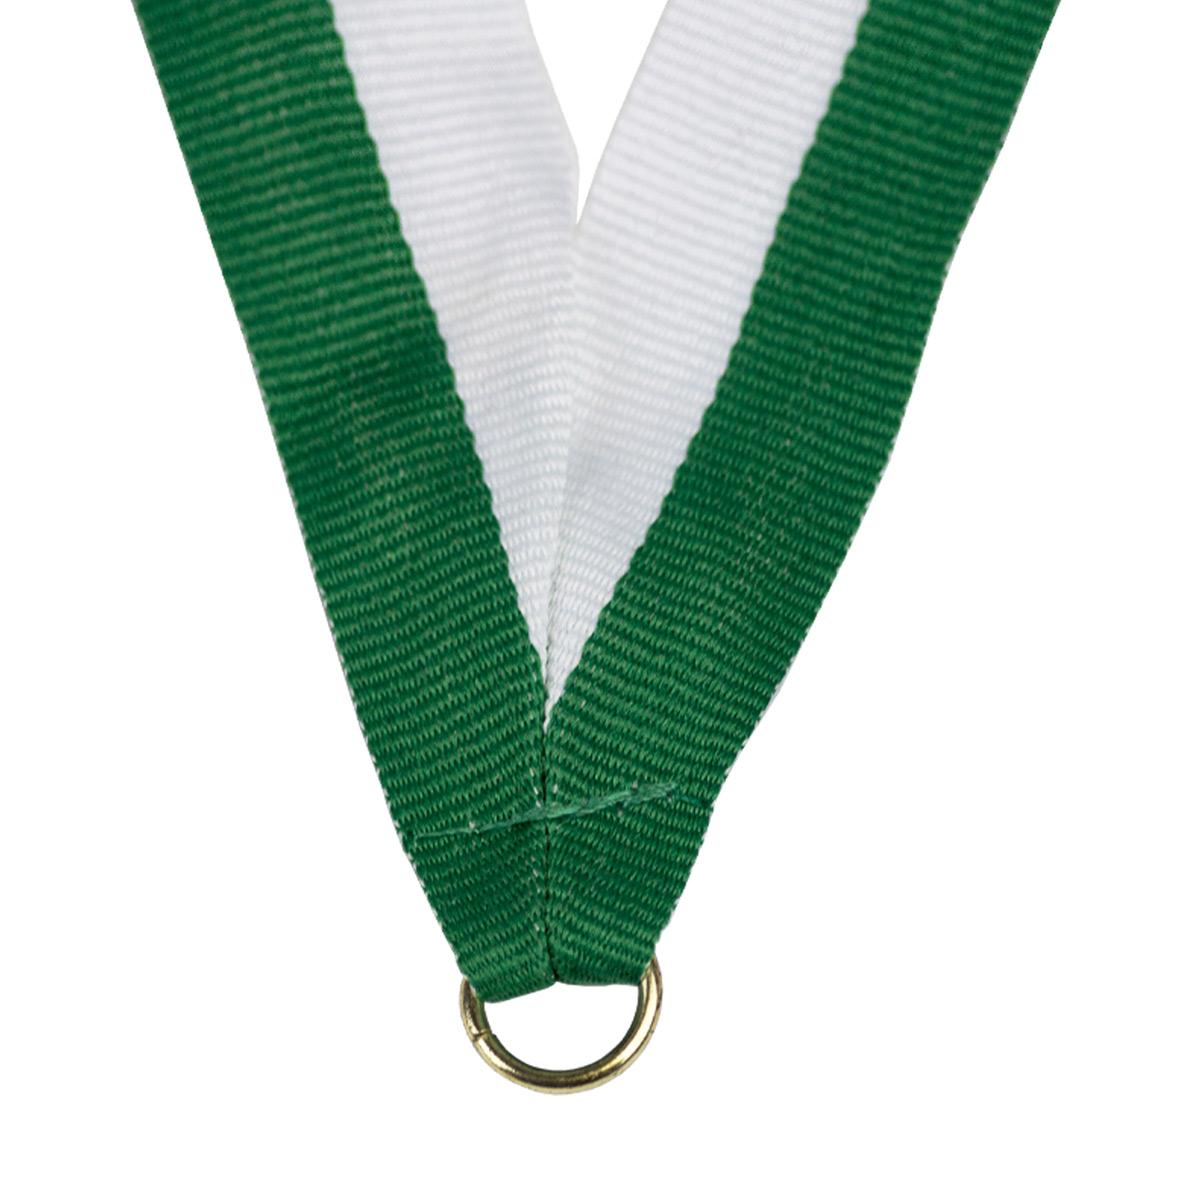 durable neck ribbon in green and white with brass jump ring